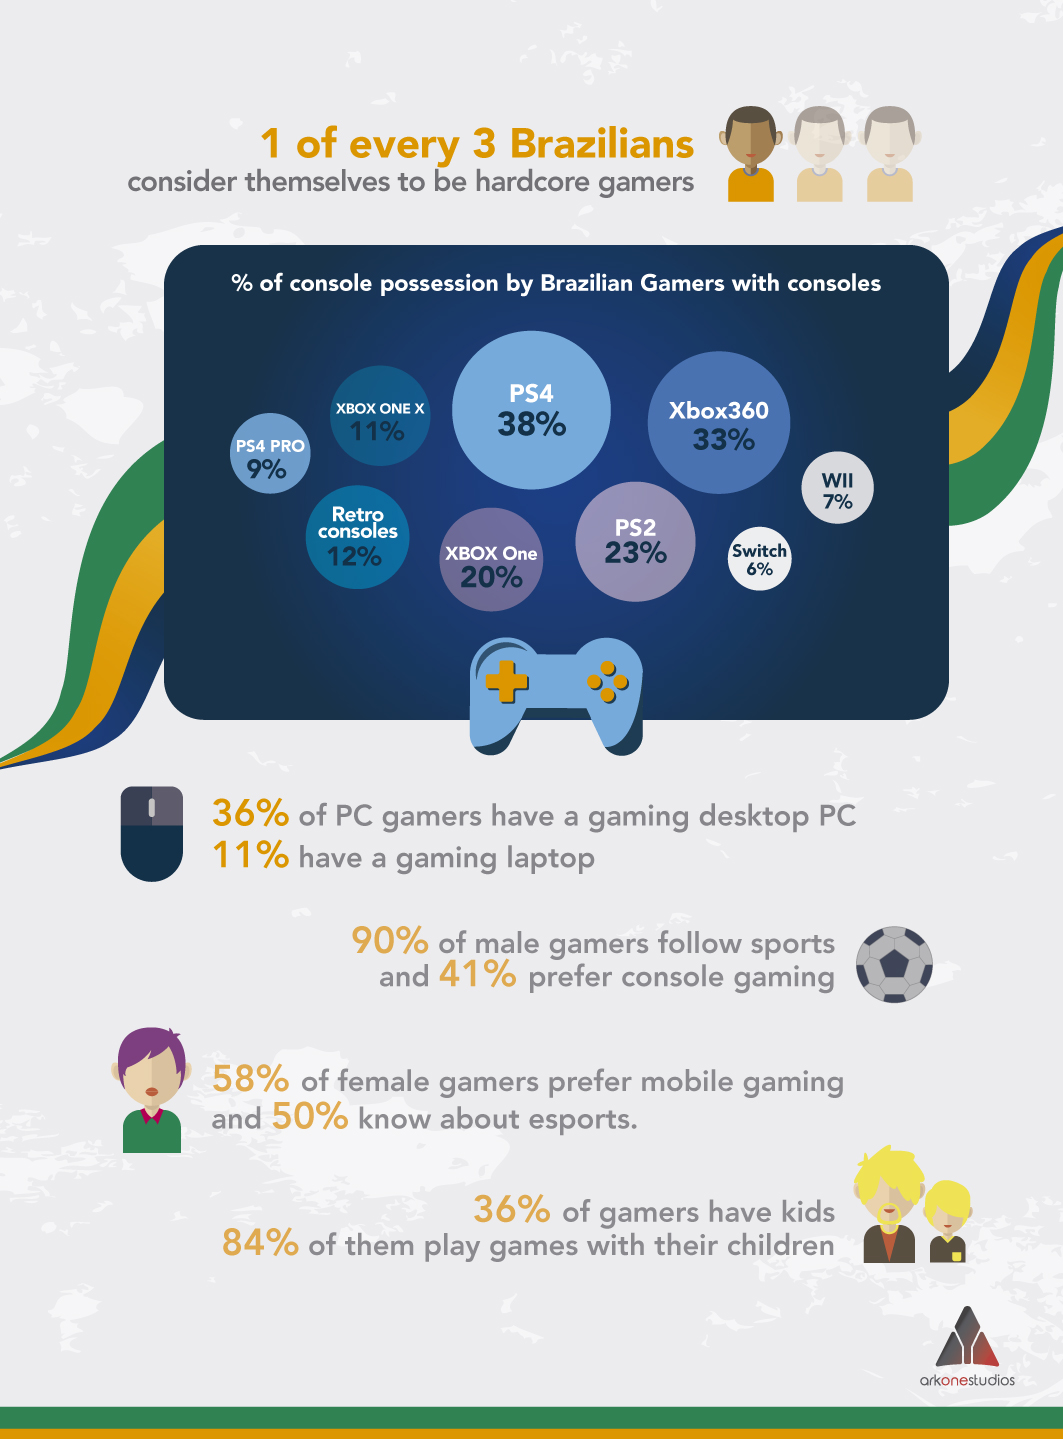 tamelucas 🎮 on X: THE COST OF GAMING IN BRAZIL: GAME PASS &  ACCESSIBILITY Inspired by @DestinLegarie's recent video, I decided to make  a new graphic to show how services like Xbox